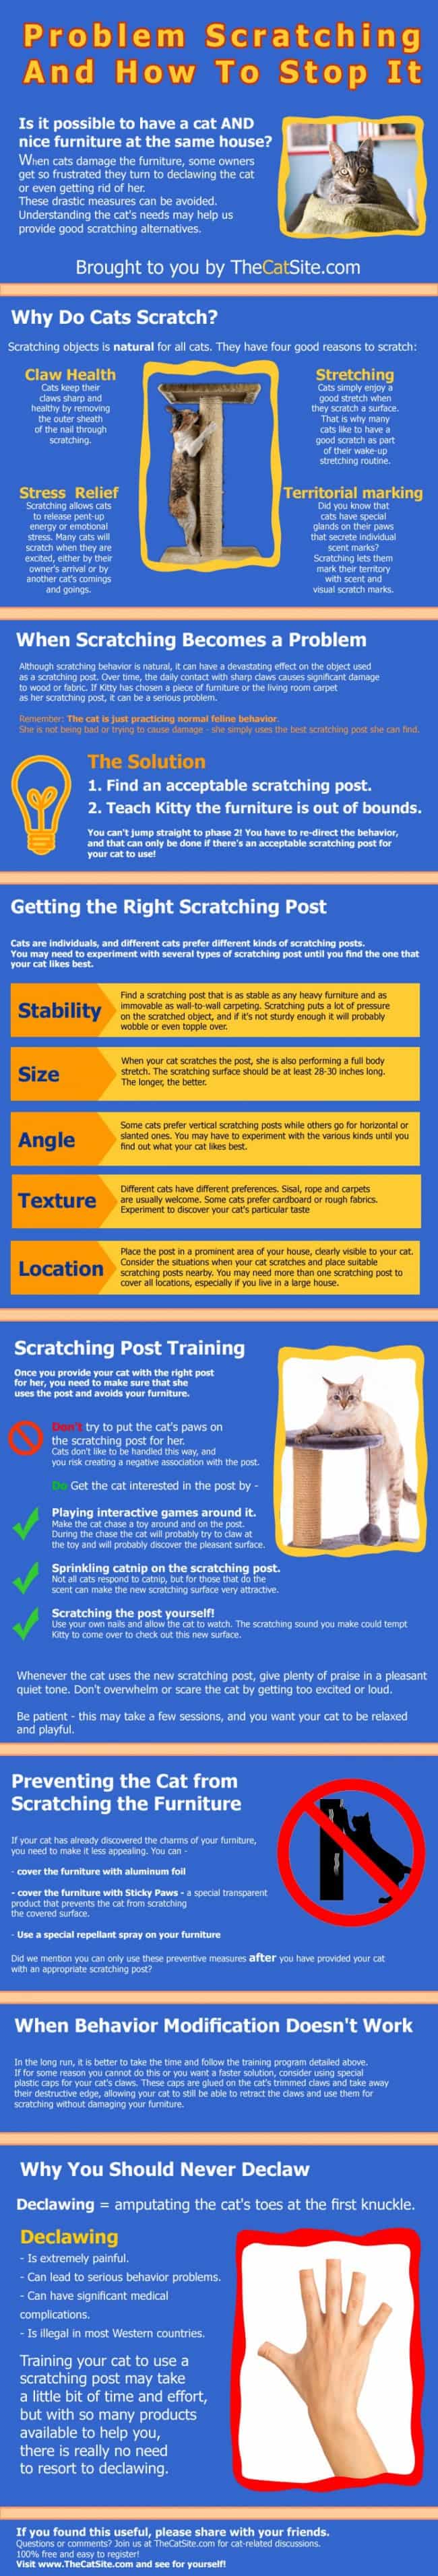 cats-problem-scratching-and-how-to-stop-it_52ca6c7f12b39_w1500